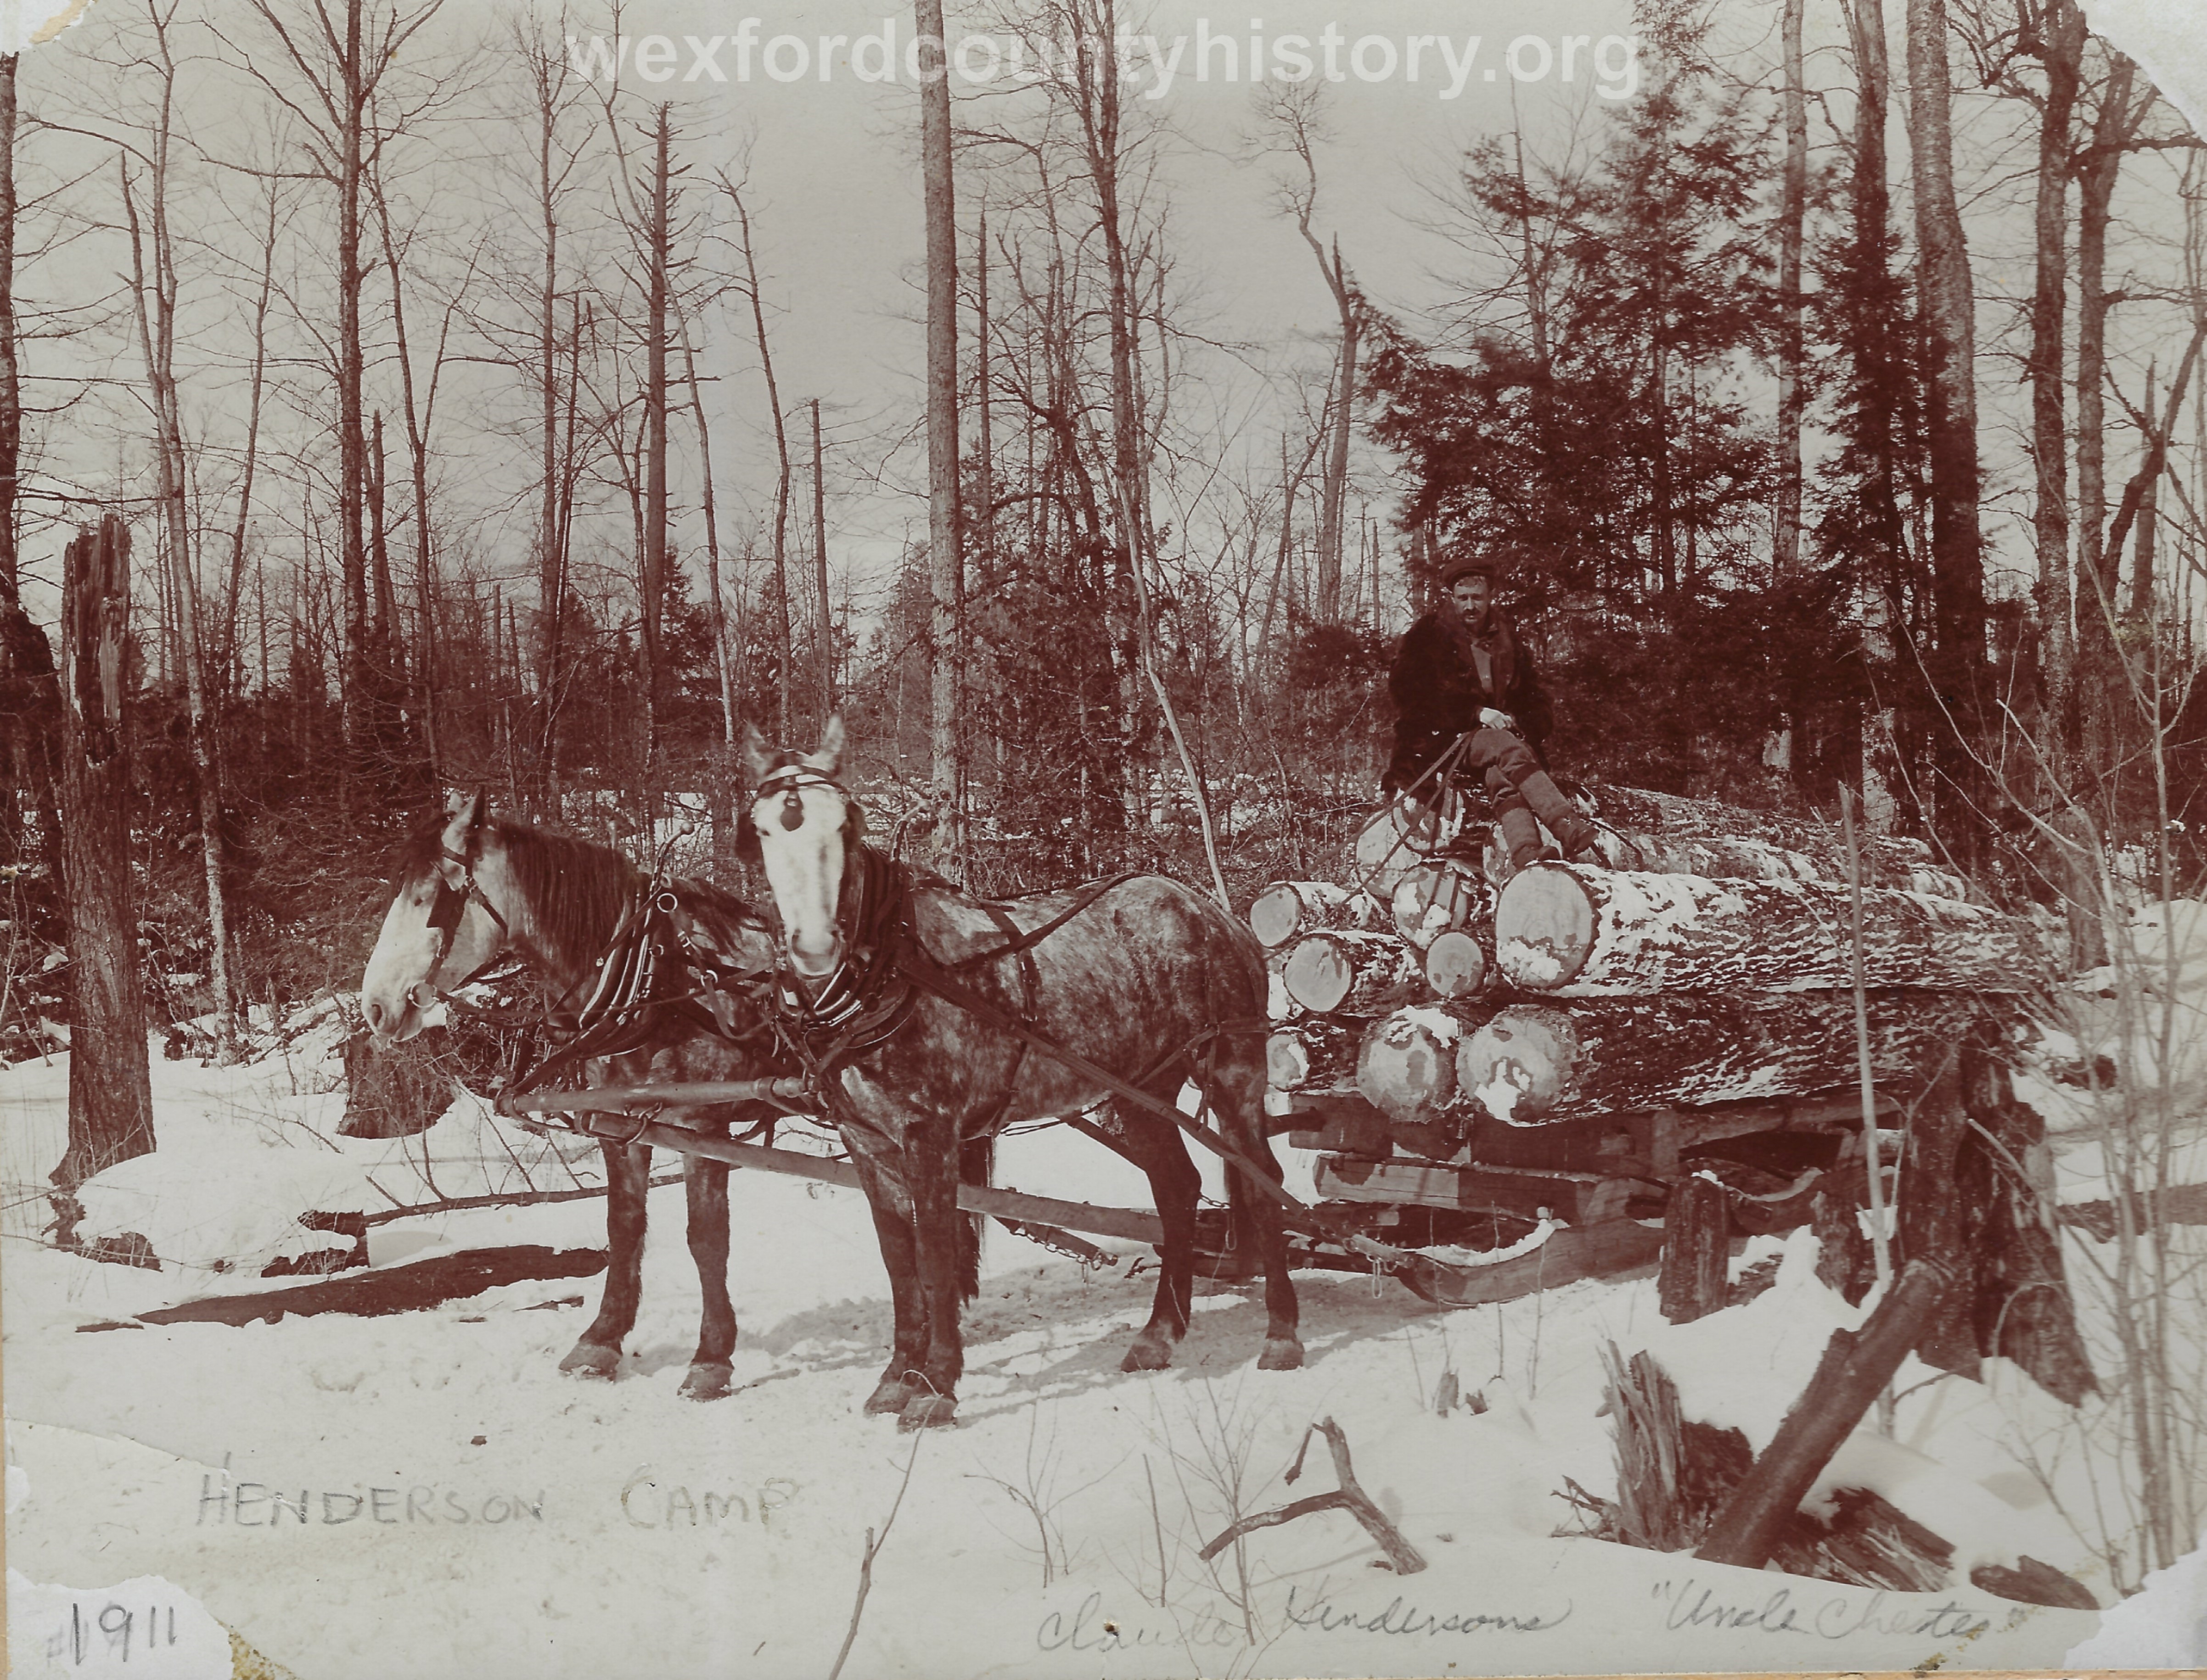 Cadillac-Lumber-Lumberjack-With-Two-Horse-Team-Pulling-Logs-By-Henderson-Camp